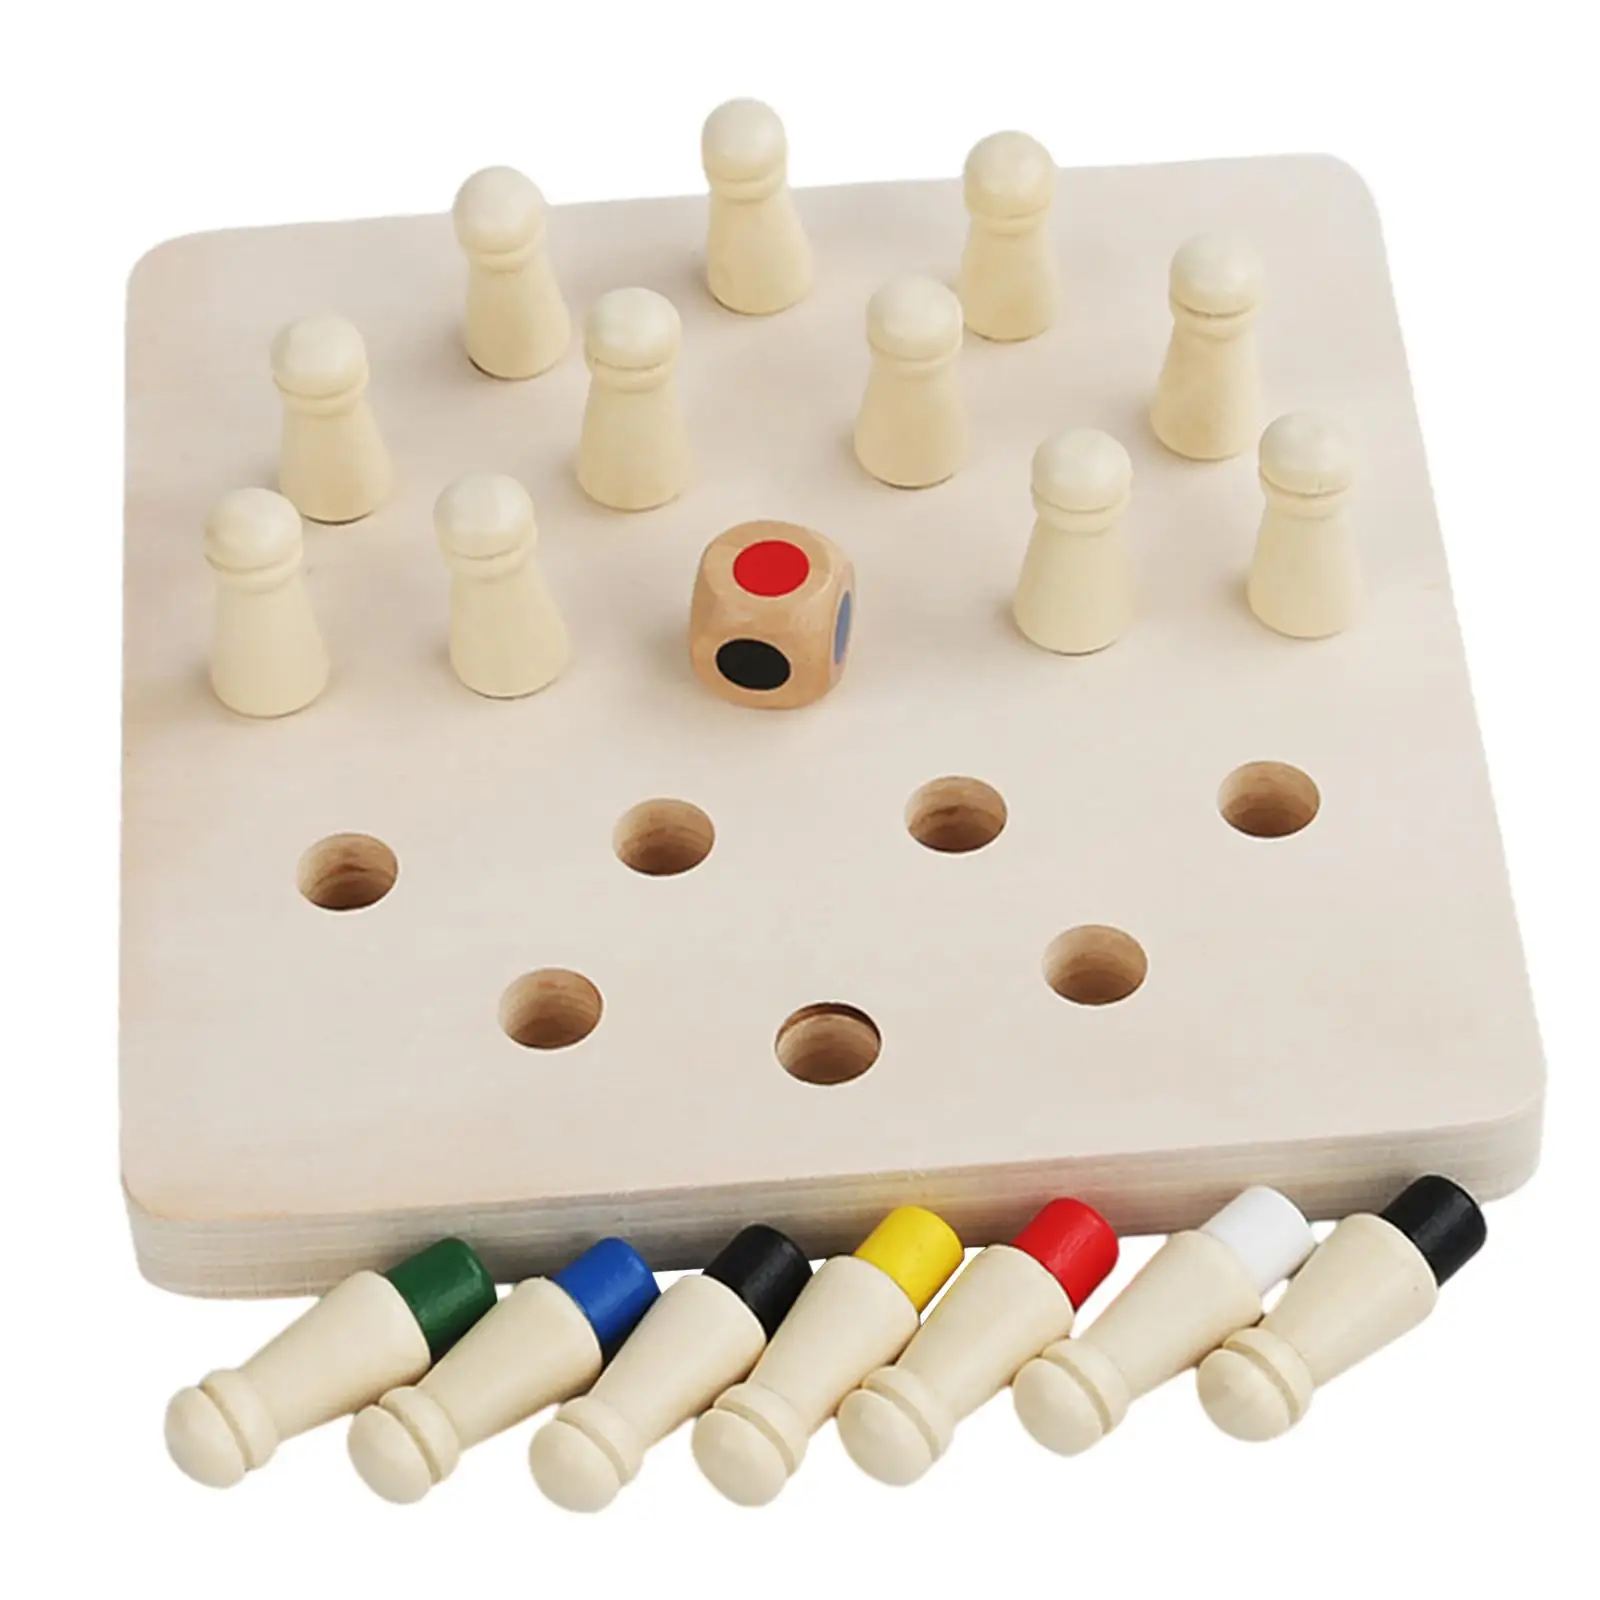 Memory Matching Chess Board Game Educational Toys Multi Player Memory Chess Toys for Kids Toddlers Boys Children Birthday Gifts